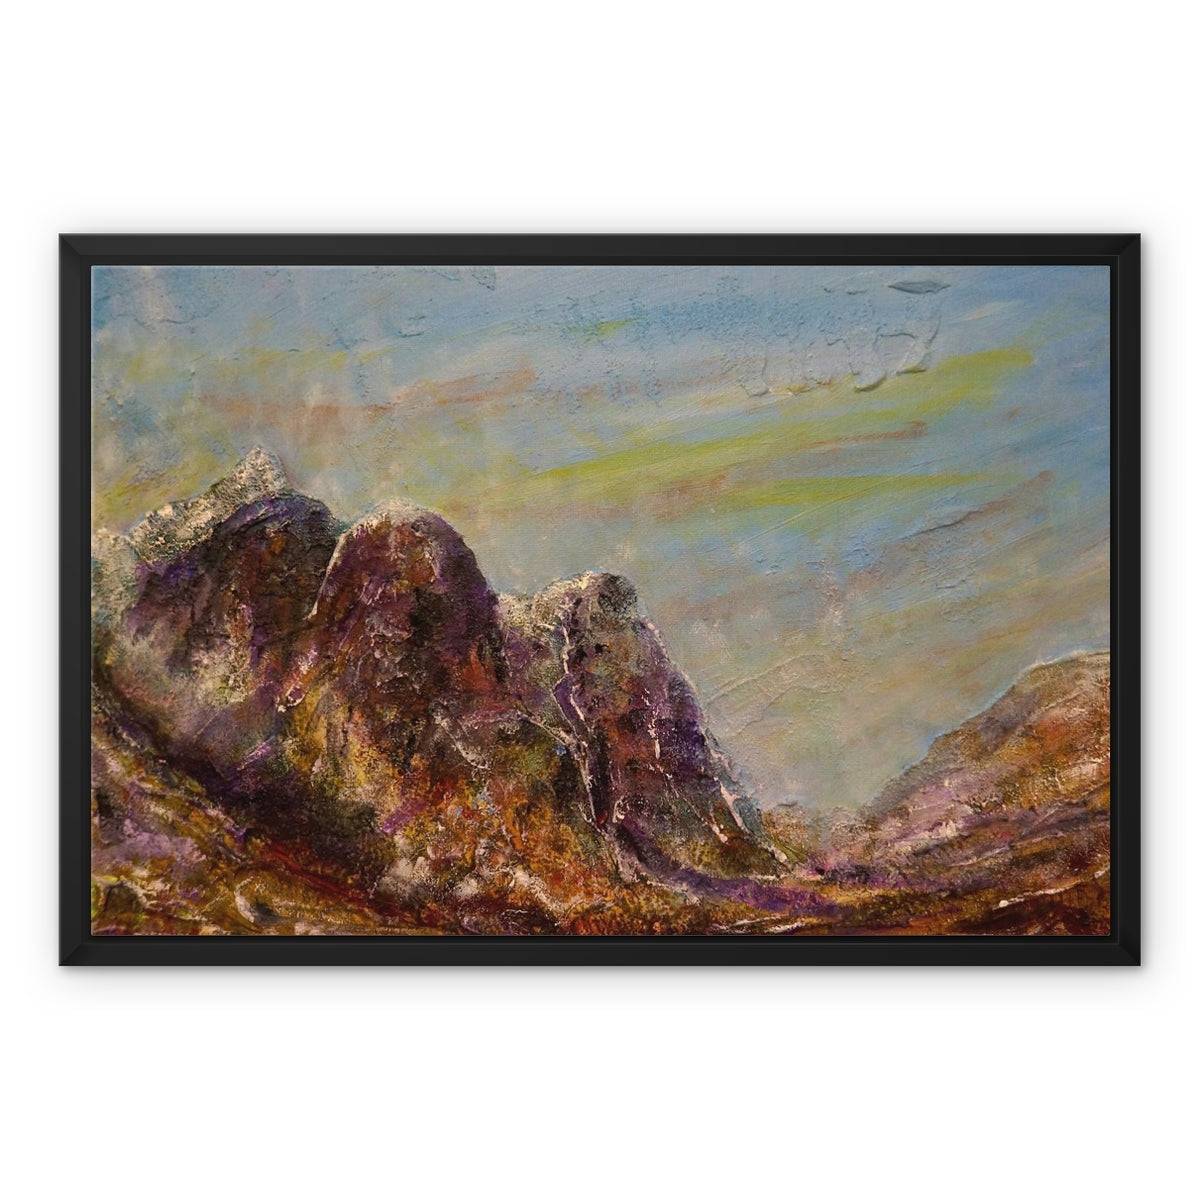 Three Sisters Glencoe Painting | Framed Canvas From Scotland-Floating Framed Canvas Prints-Glencoe Art Gallery-24"x18"-Black Frame-Paintings, Prints, Homeware, Art Gifts From Scotland By Scottish Artist Kevin Hunter